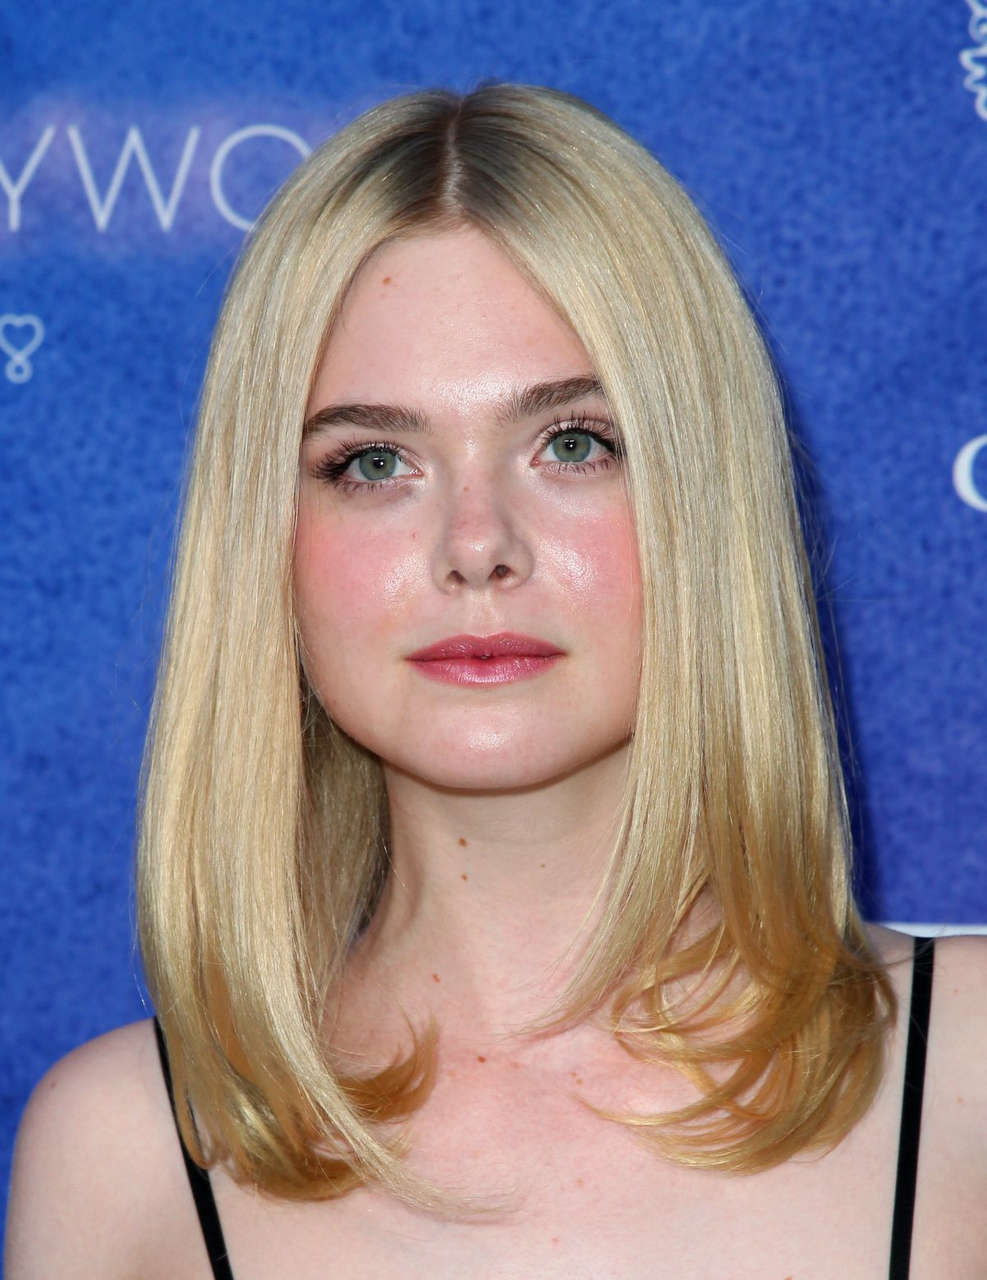 Elle Fanning Power Of Young Hollywood Party Los Angeles